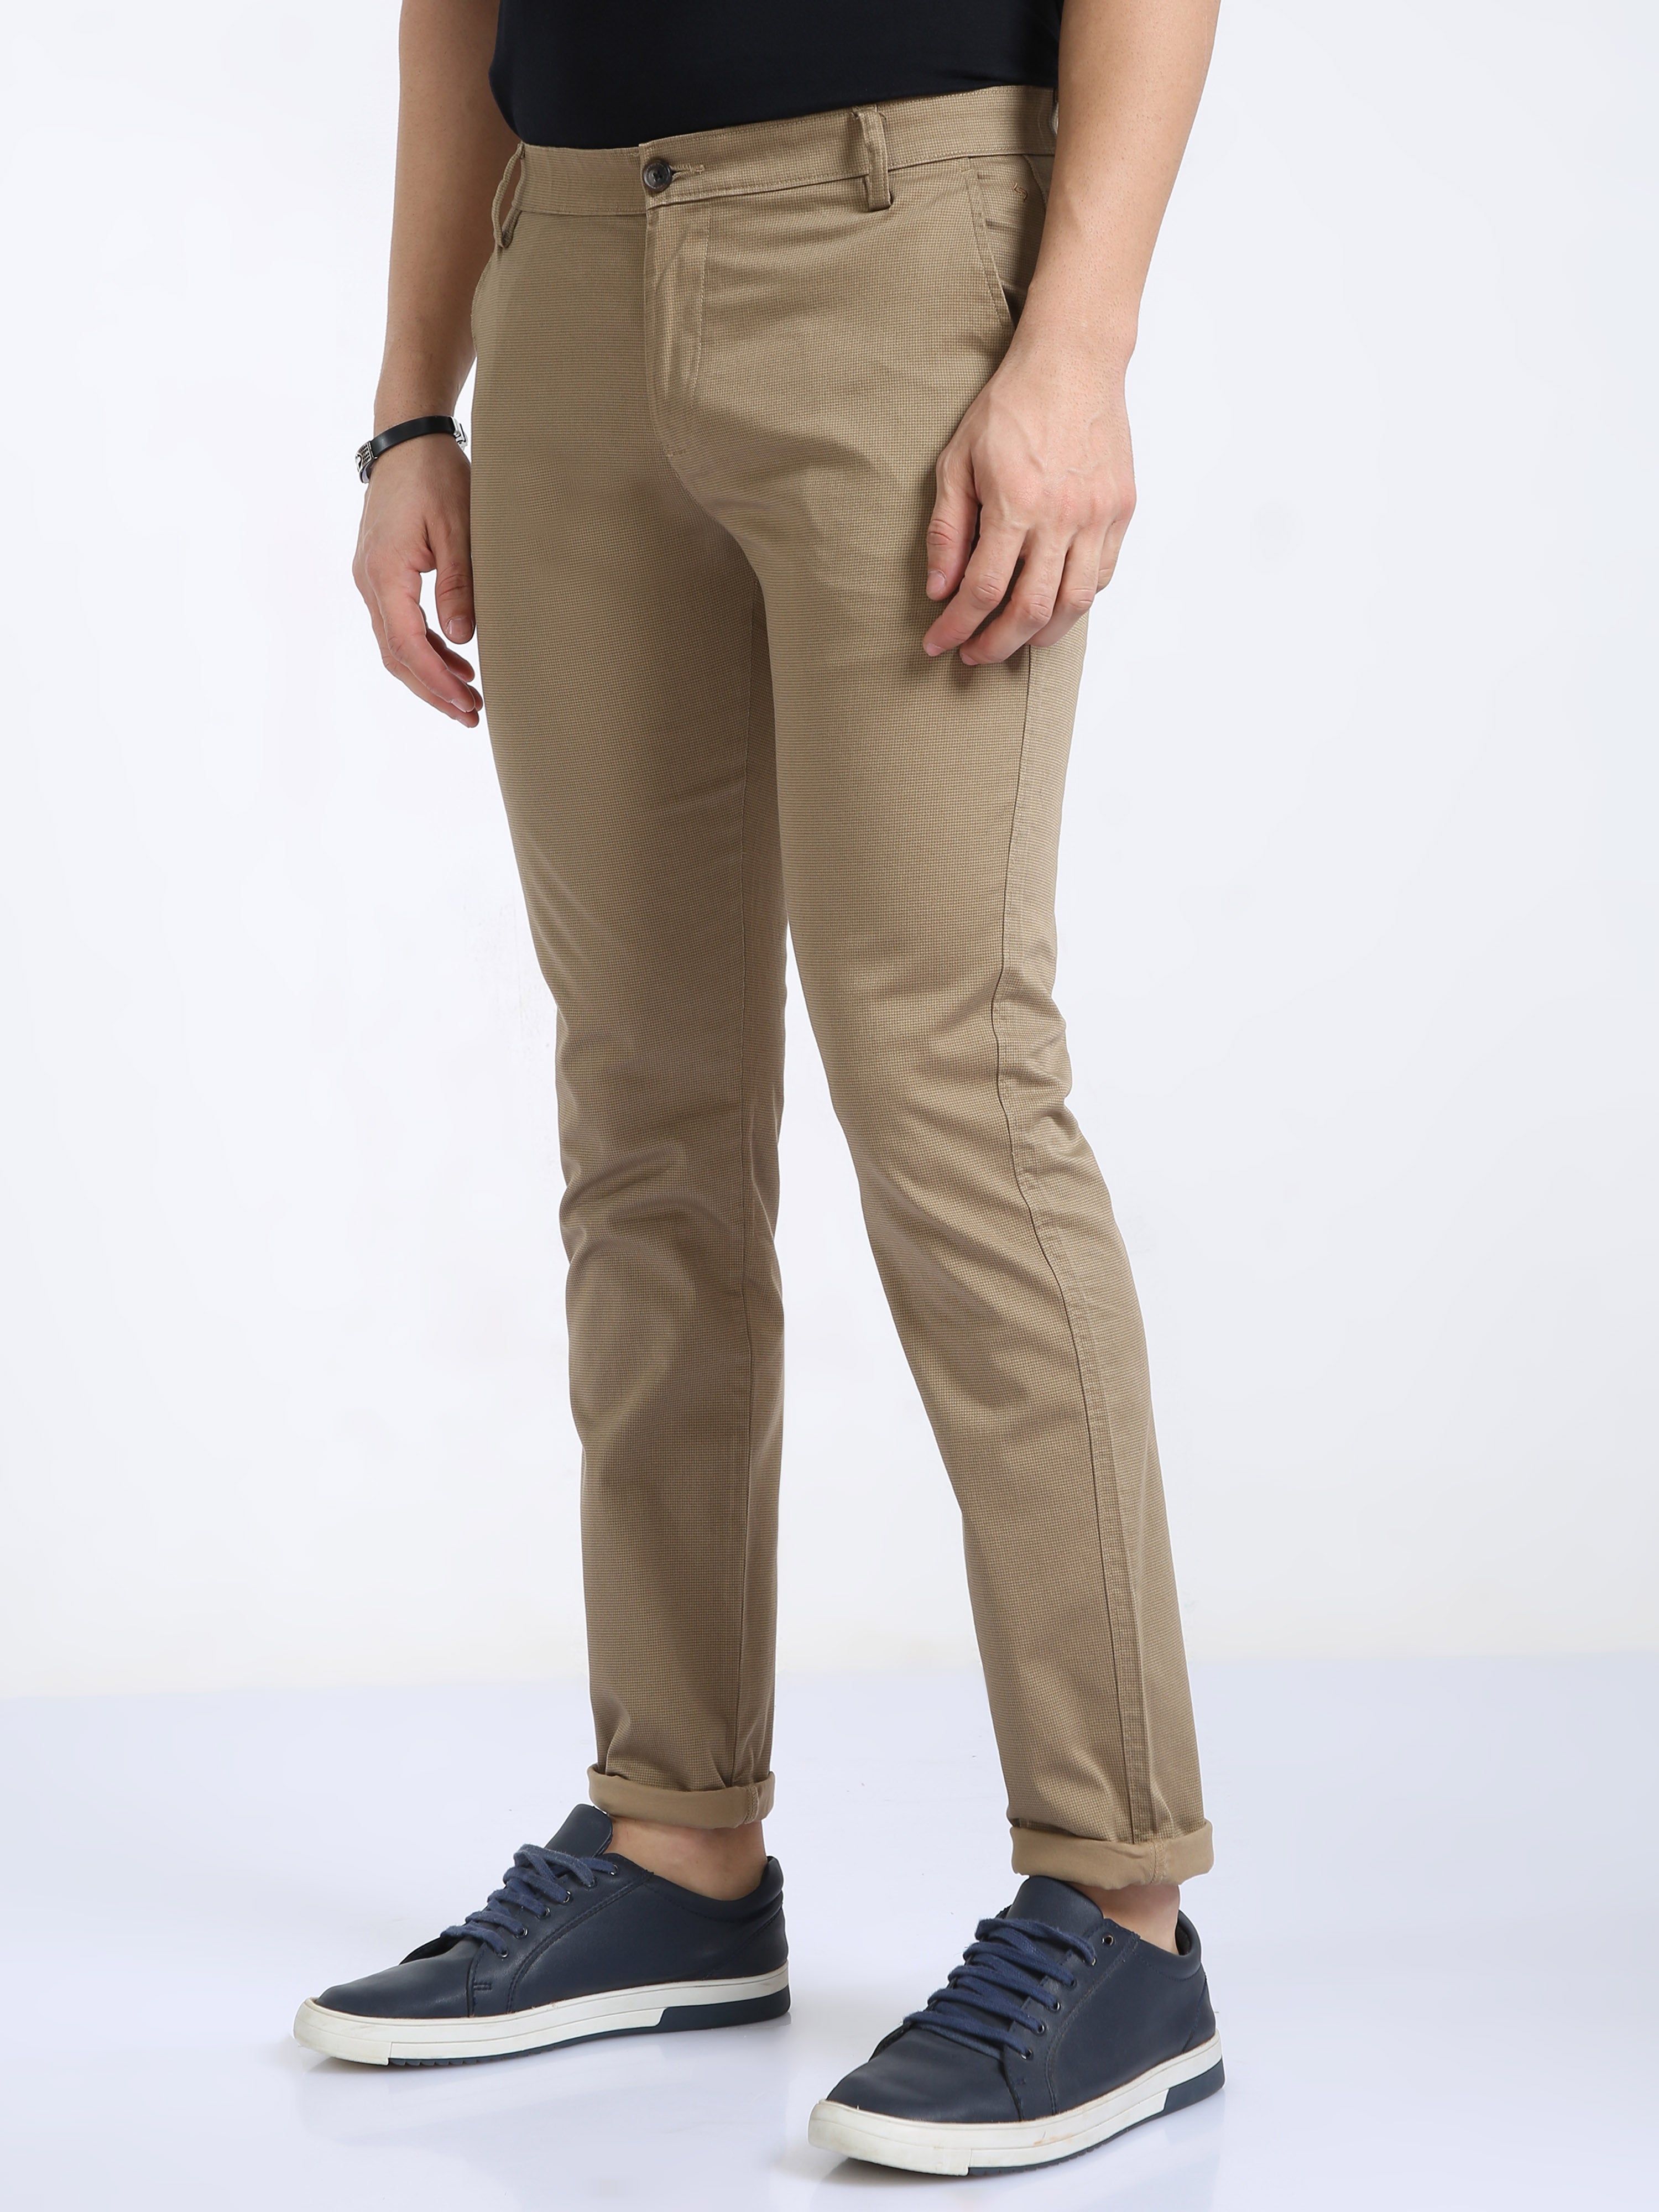 Classic Polo Mens Moderate Fit Solid Khakhi Color Trousers | To2-21 D-Kha-Mf-Ly